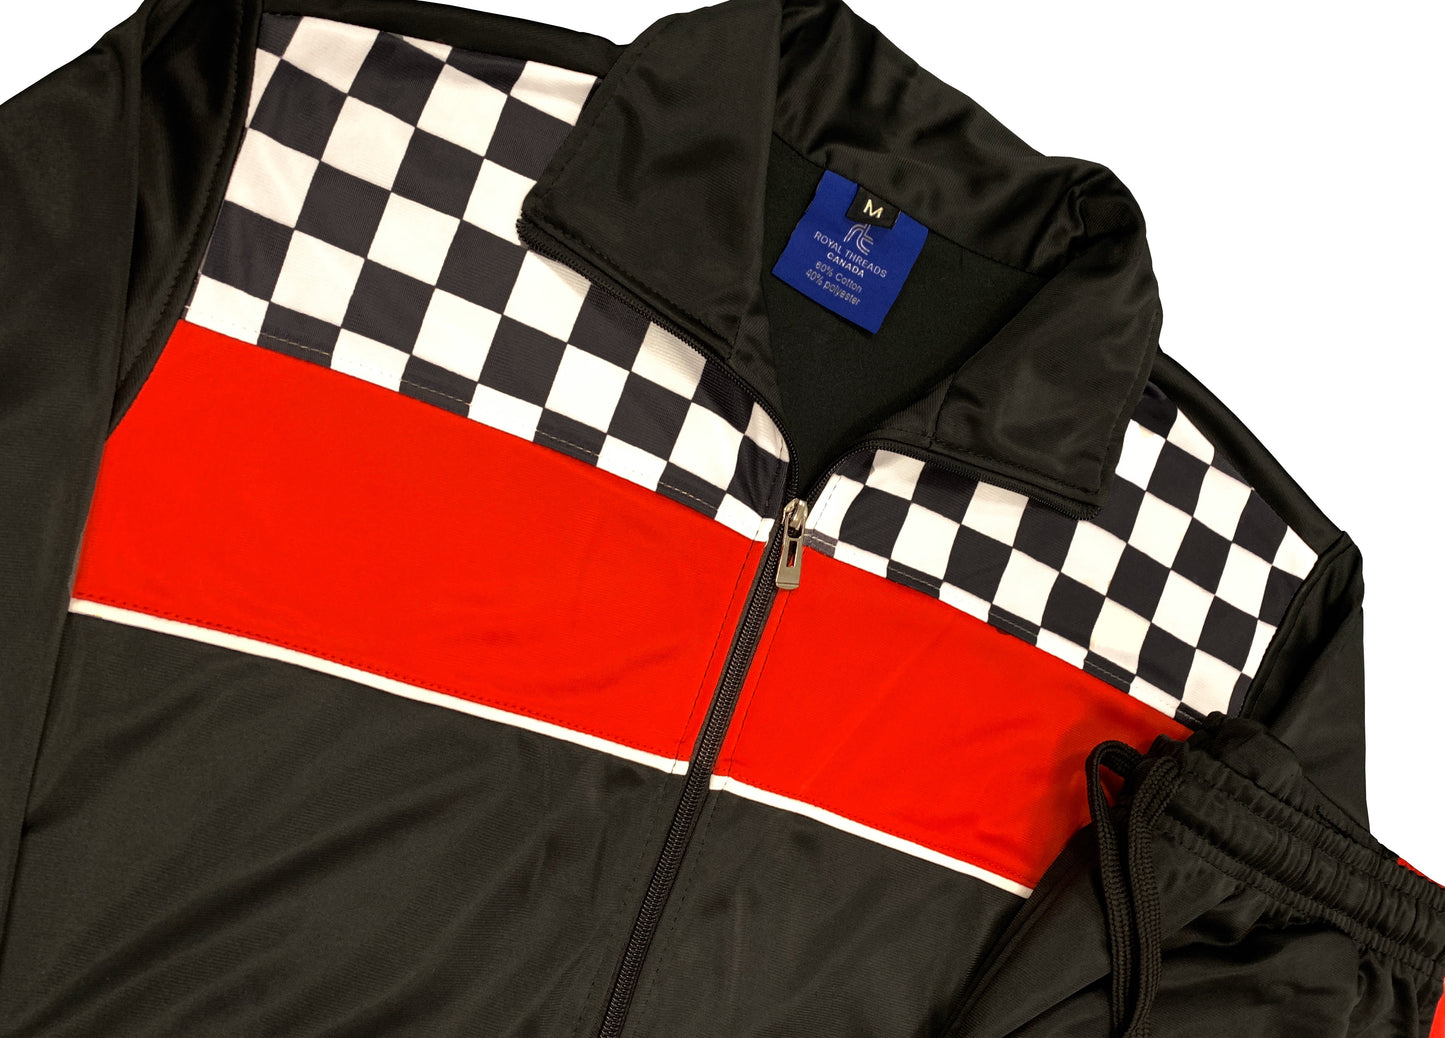 Men’s Tracksuit Checker Boxed Track jacket & Track pants Full Suit Matching Jogging Set